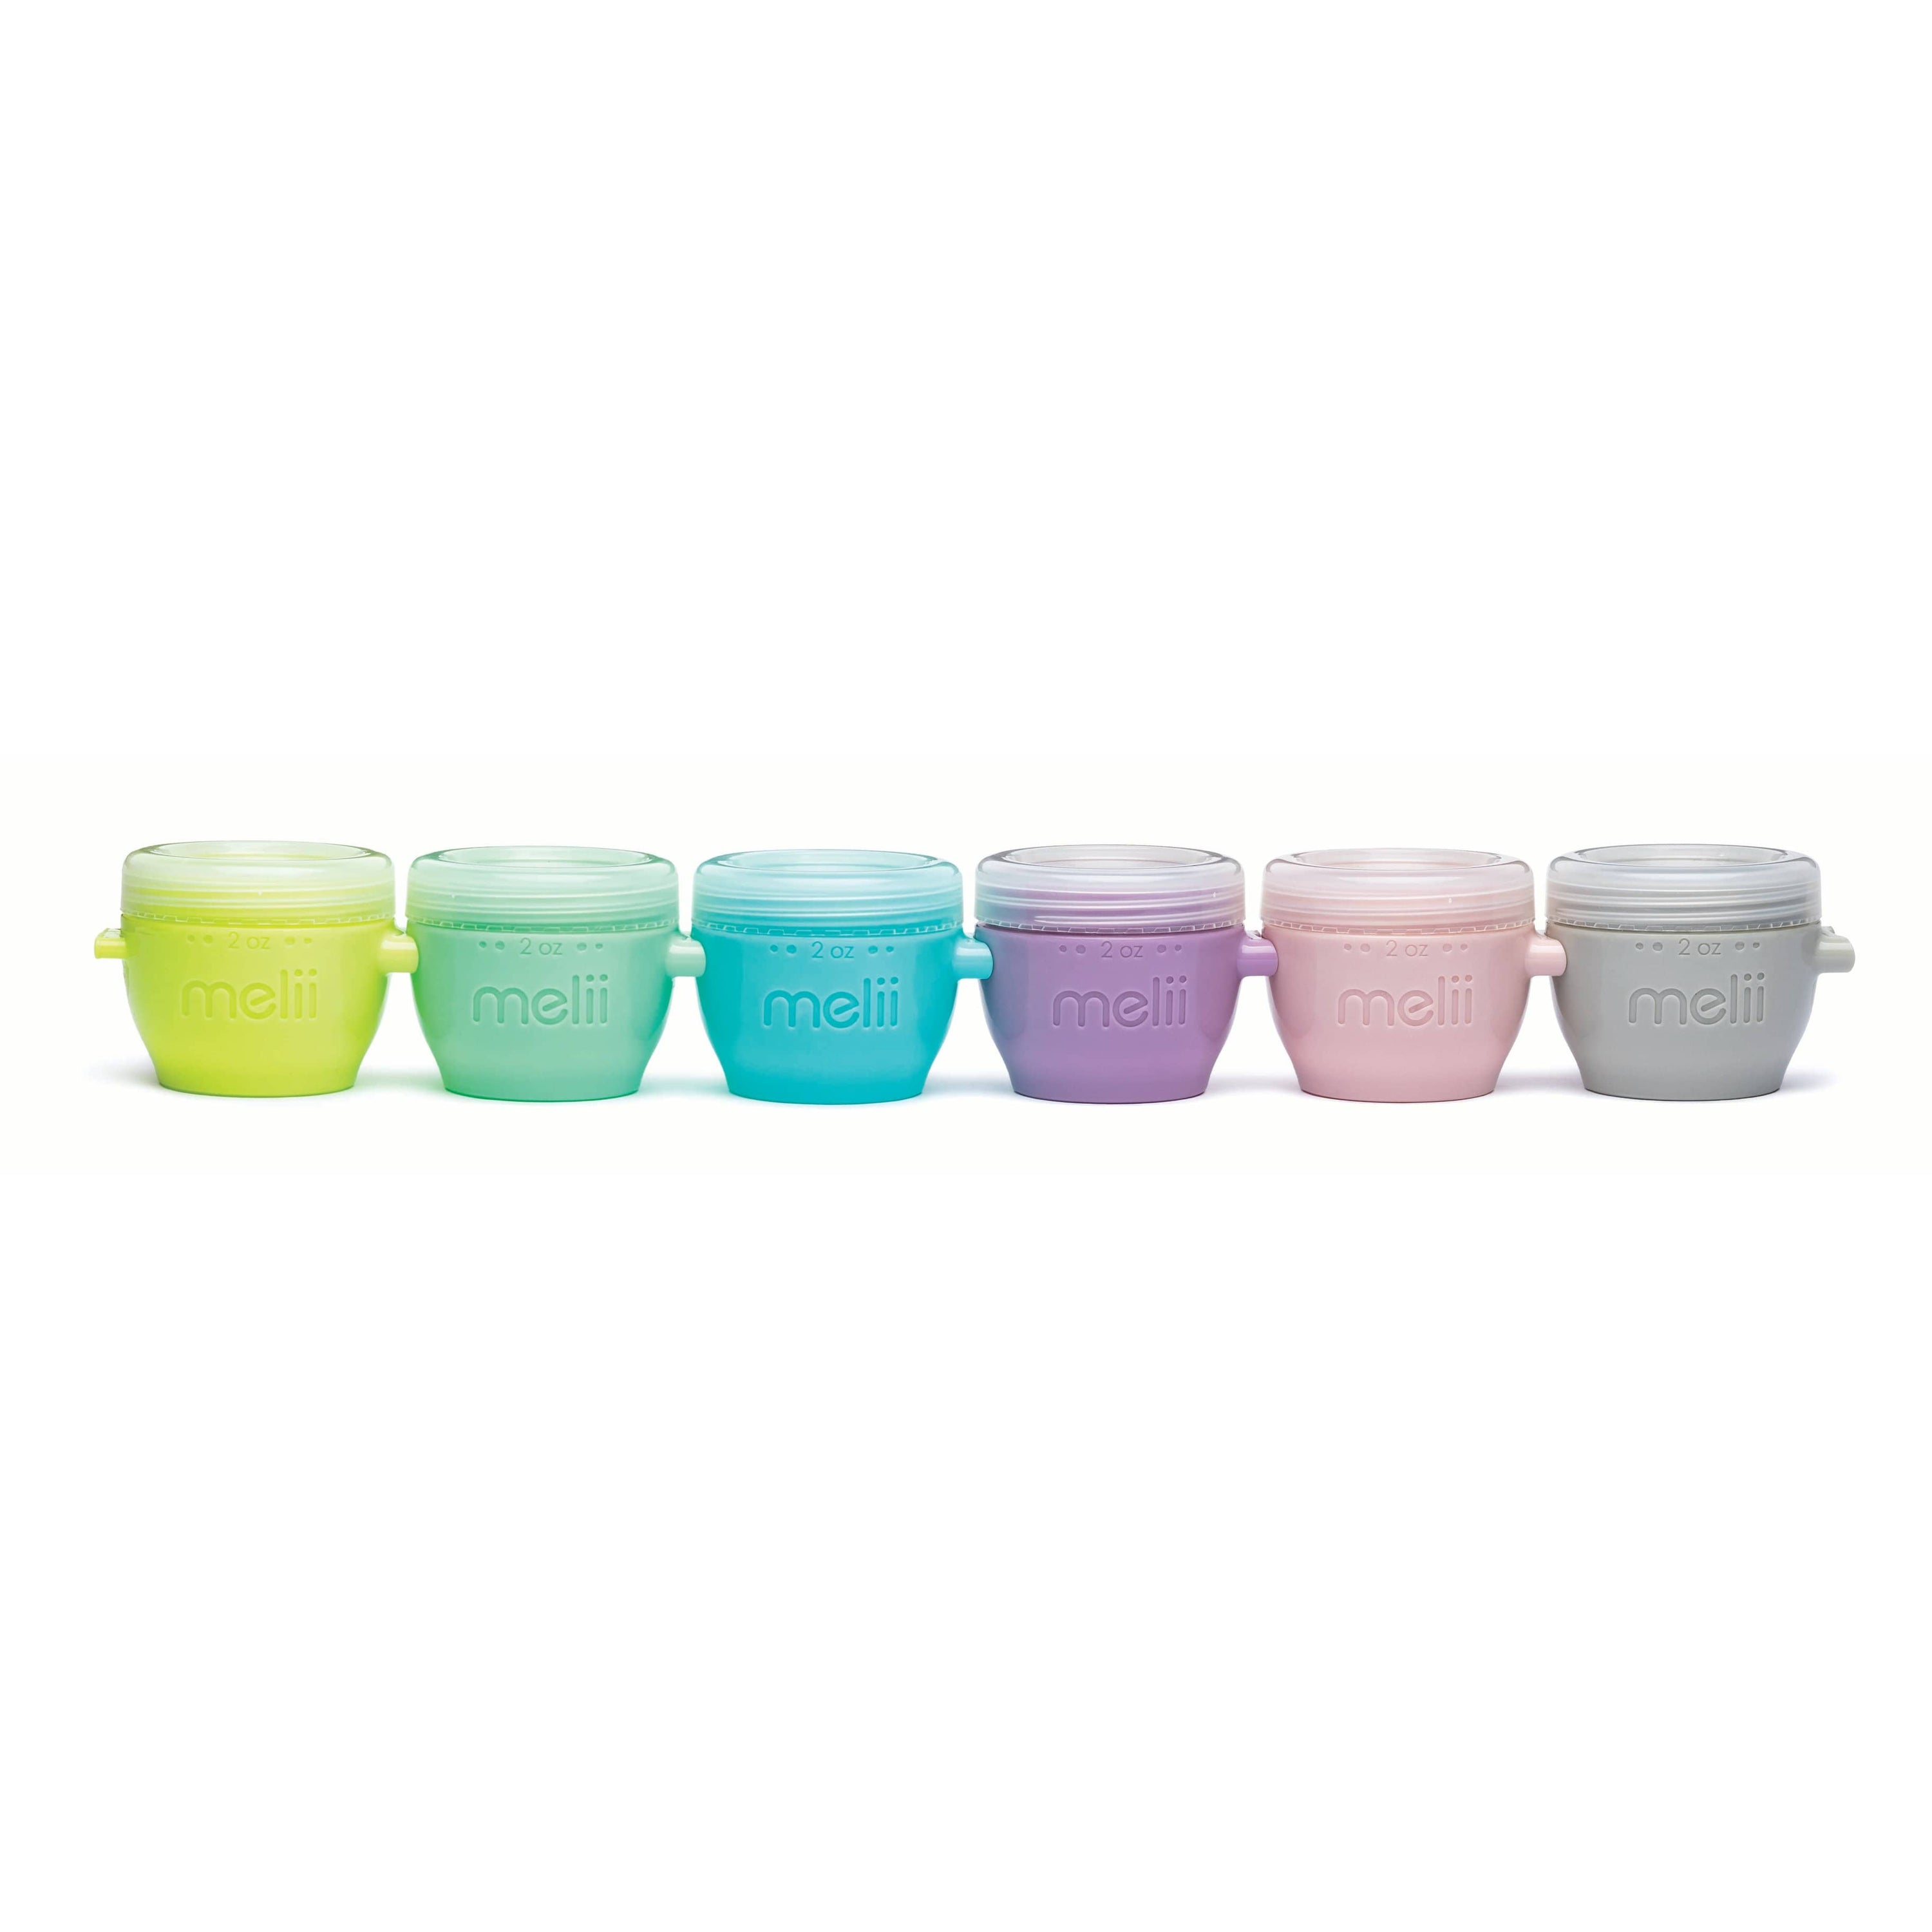 2oz Snap & Go Pods - 6 Freezer & Snack Containers